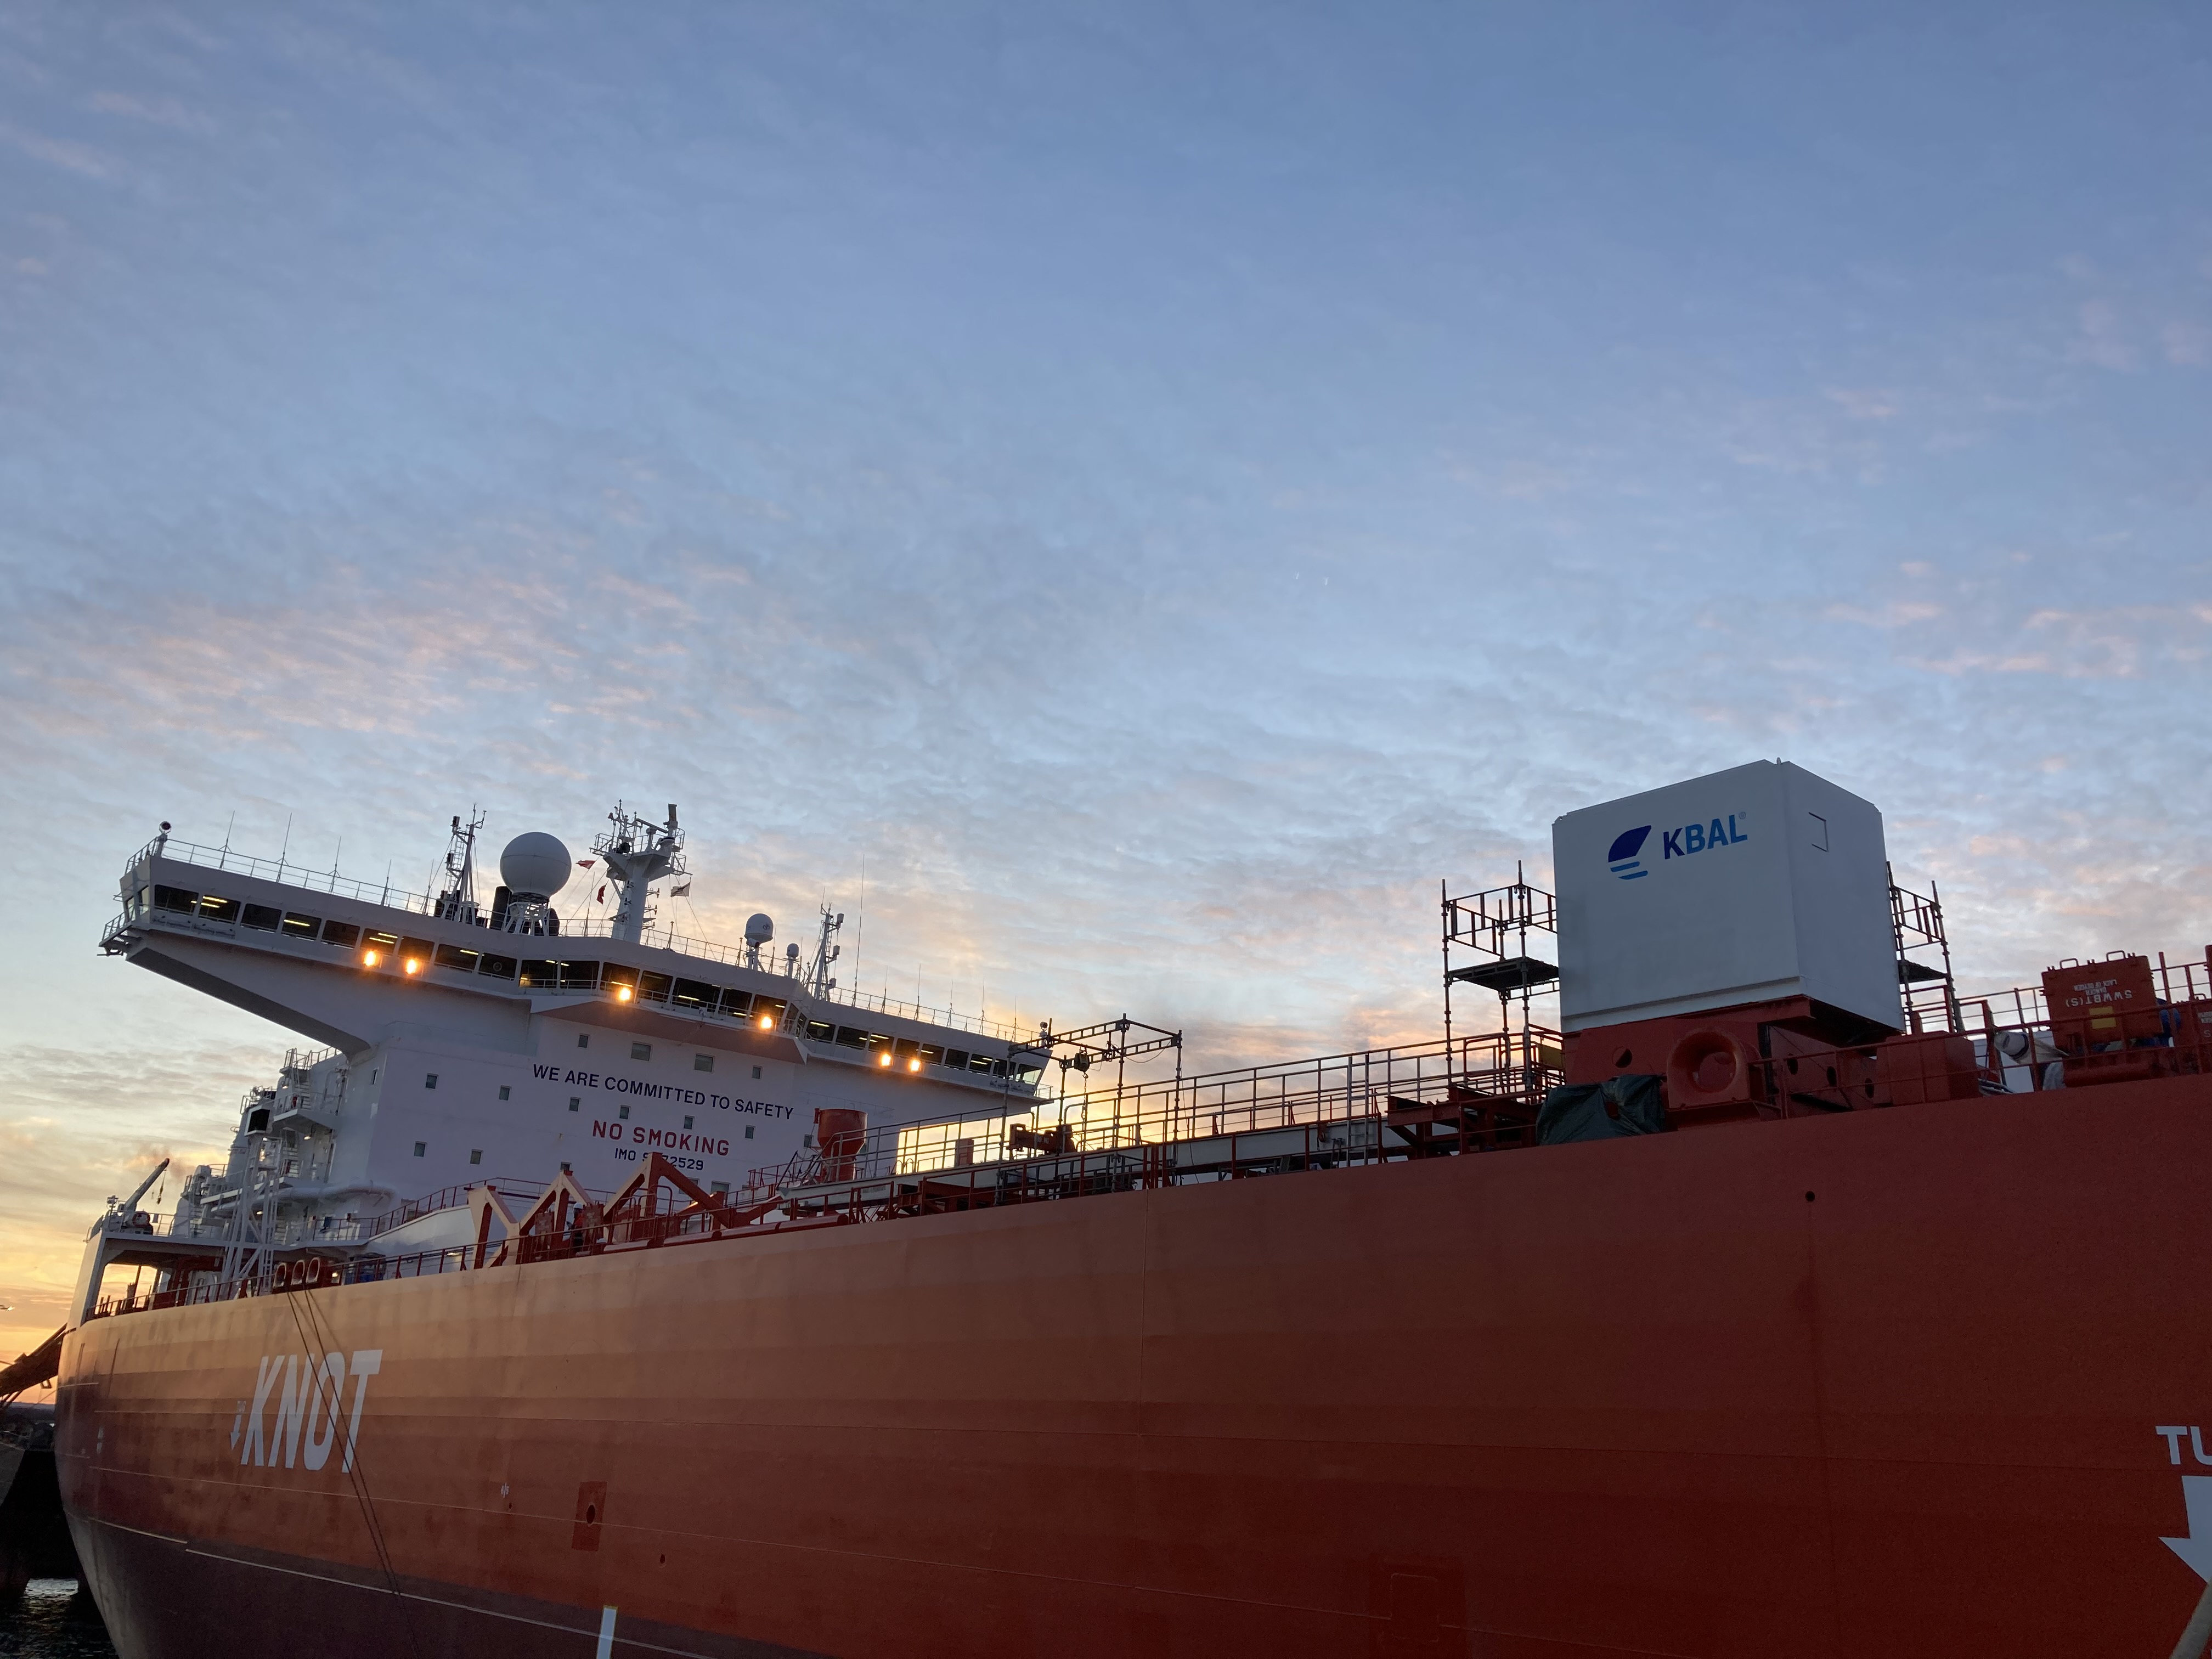 KBAL and Høglund join forces to offer shipowners ground-breaking ballast water technology on a superb automation platform